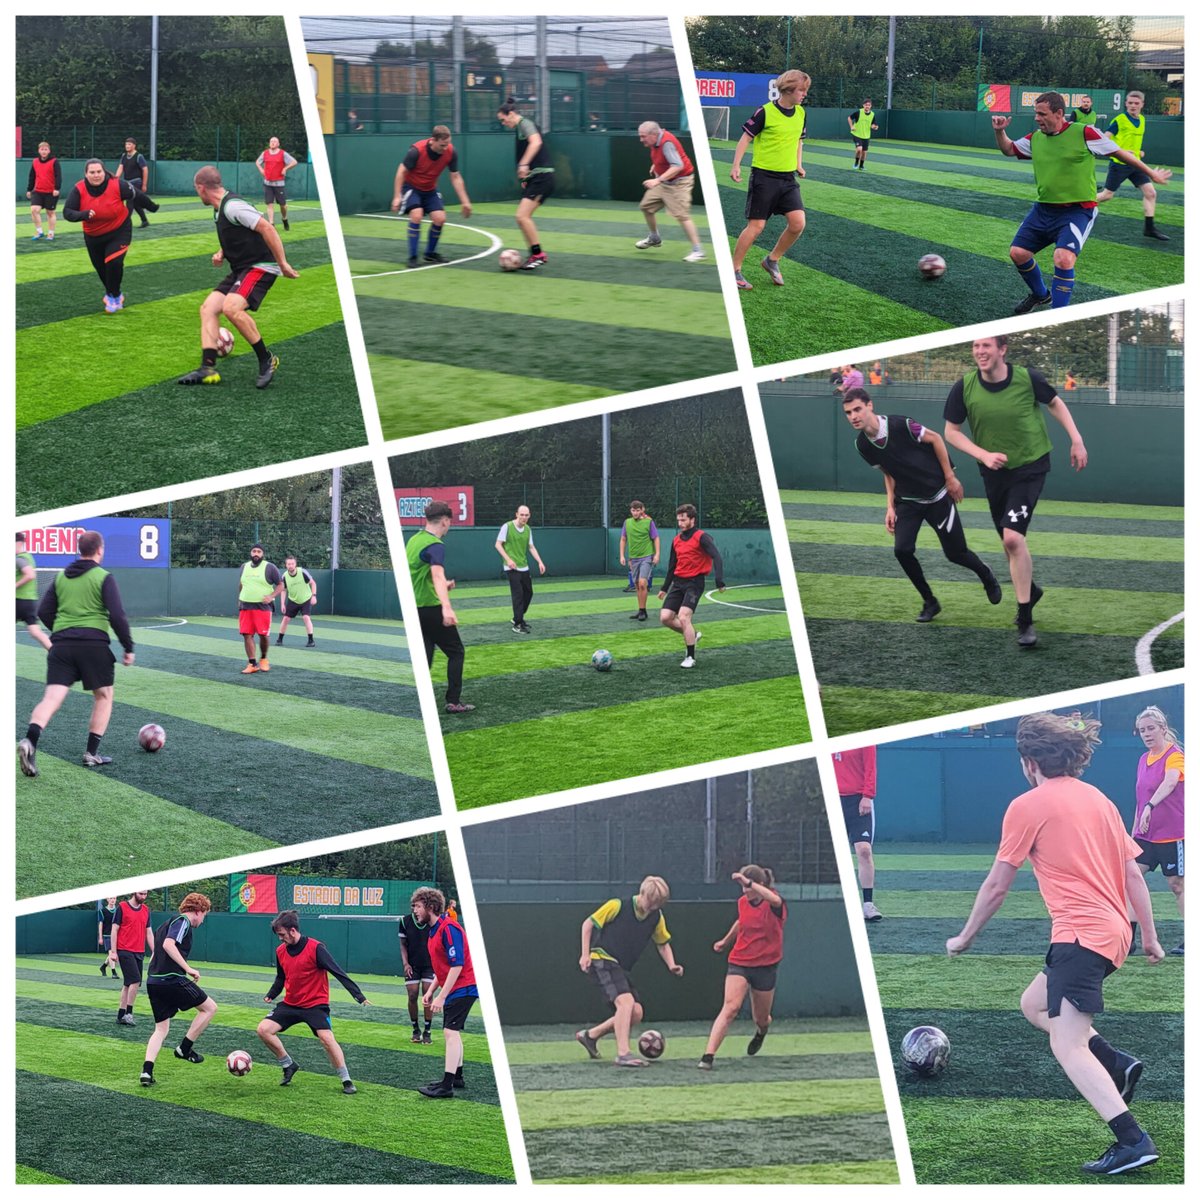 Back in action tonight @goalsfootballuk Netherton. Newcomers Always Welcome. Our sessions are specifically for adults affected by mental ill health or poor mental wellbeing. No Referral Required. Supported by @FirstPersonCIC